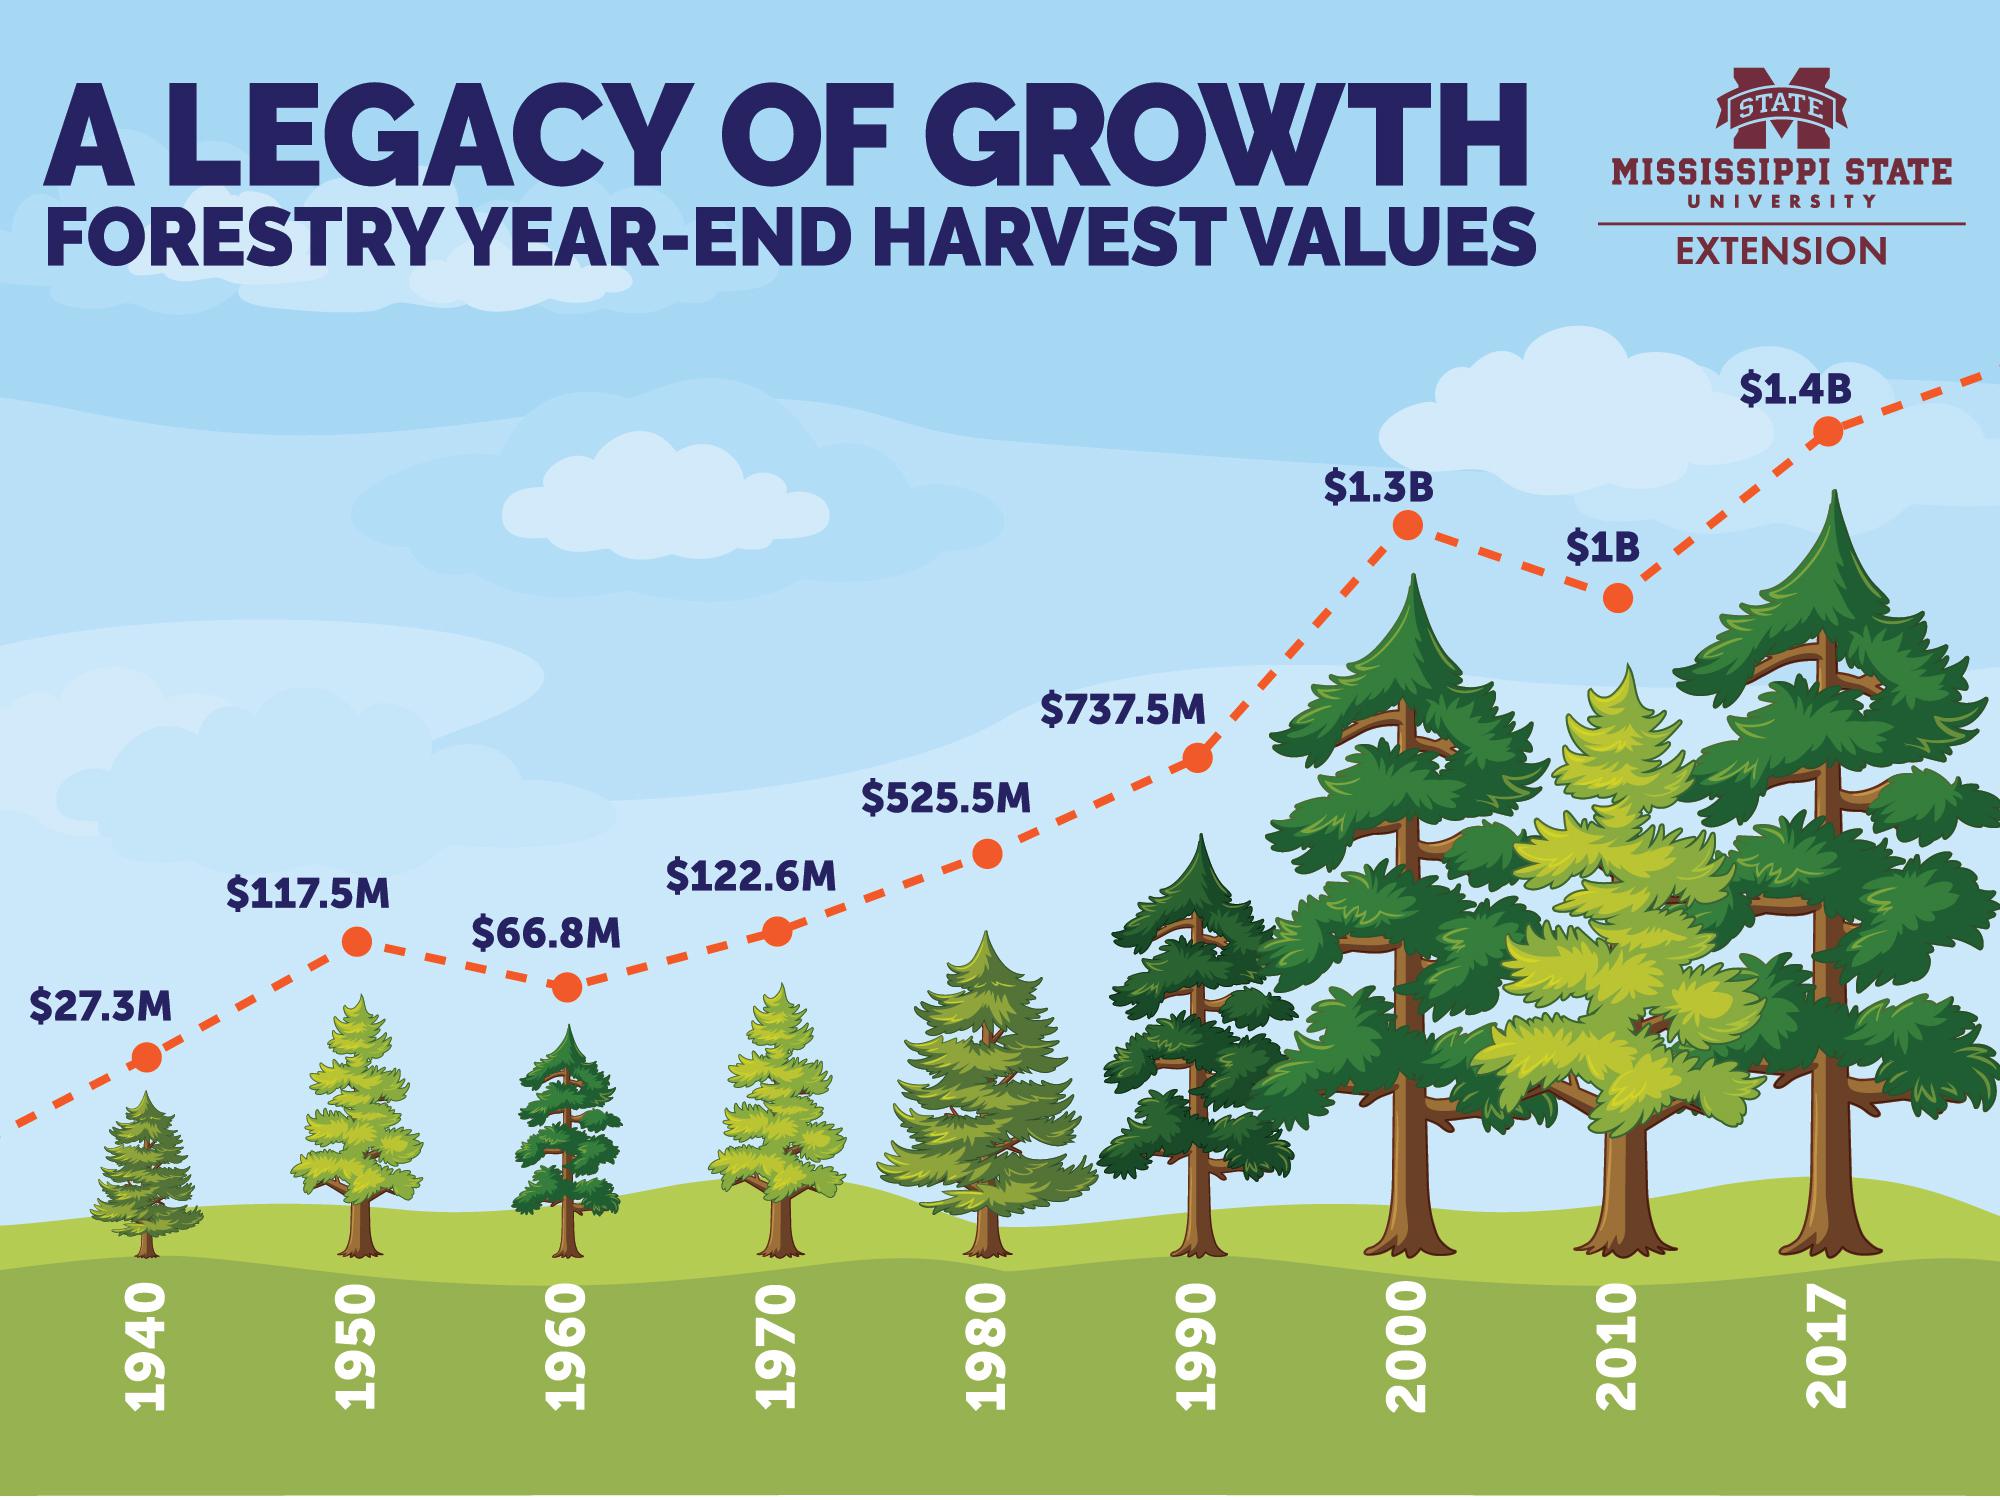  Forestry year-end harvest values from 1940 through 2017, 1940 = $27.3 million, 1950 = $117.5 million, 1960 = $66.8 million, 1970 = $122.6 million, 1980 = $525.5 million, 1990 = $737.5 million, 2000 = $1.3 billion, 2010 = $1 billion, 2017 = $1.4 billion